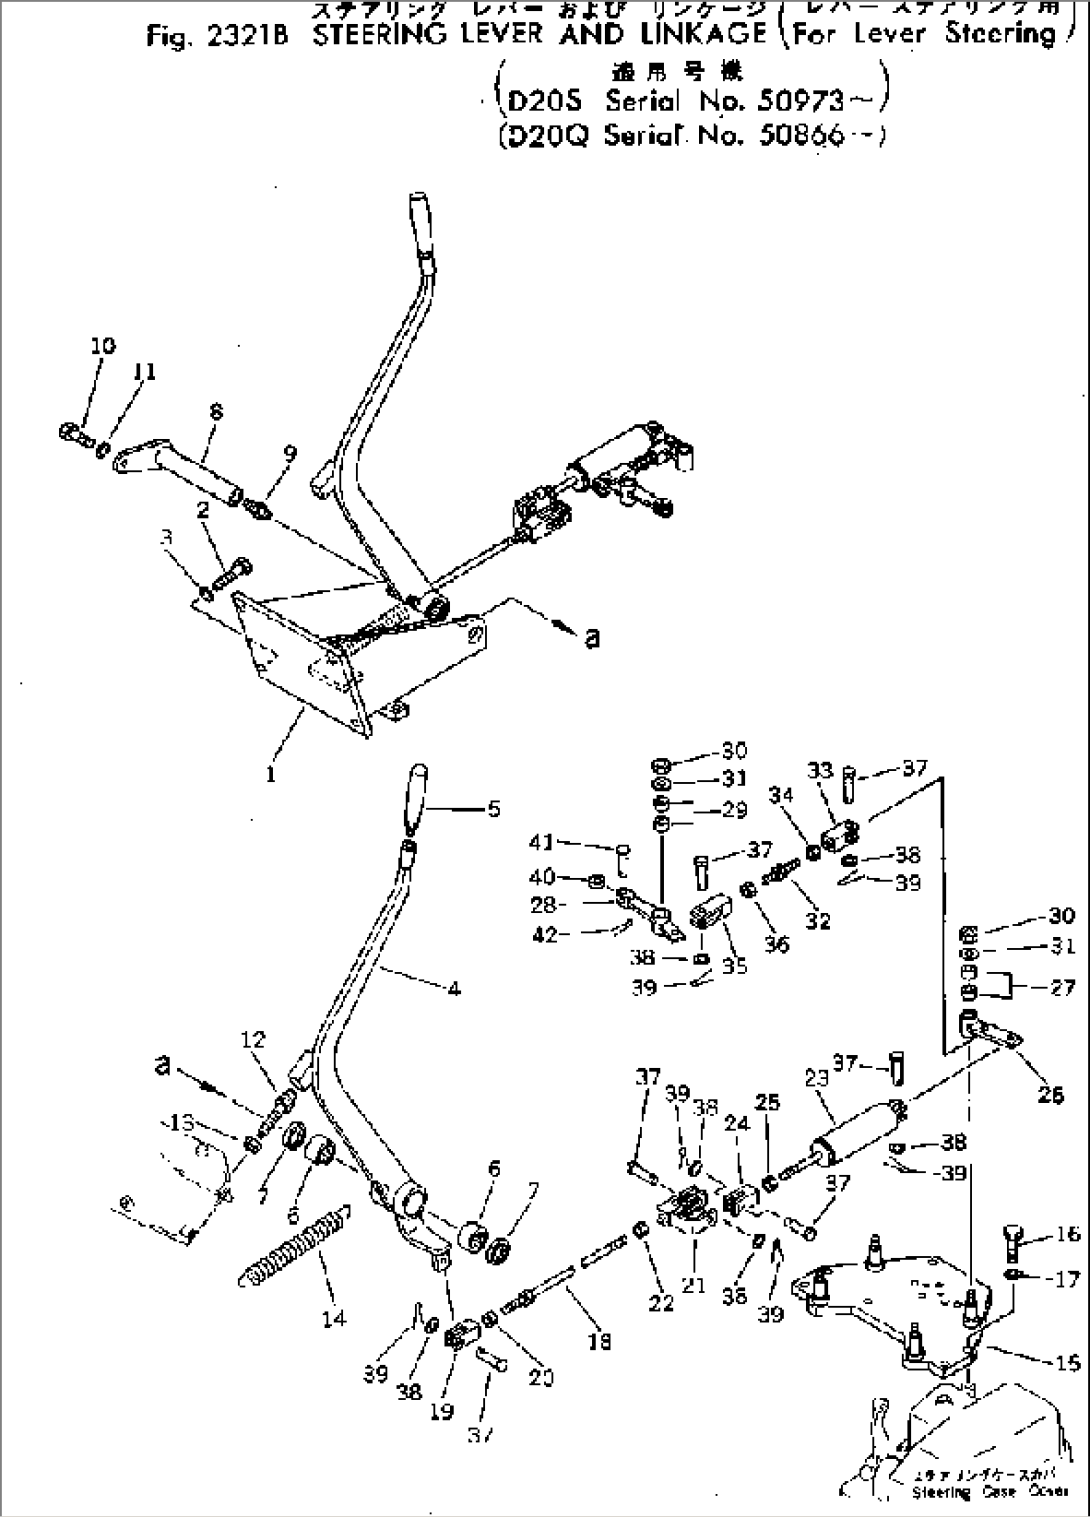 STEERING LEVER AND LINKAGE (FOR LEVER STEERING)(#50866-)